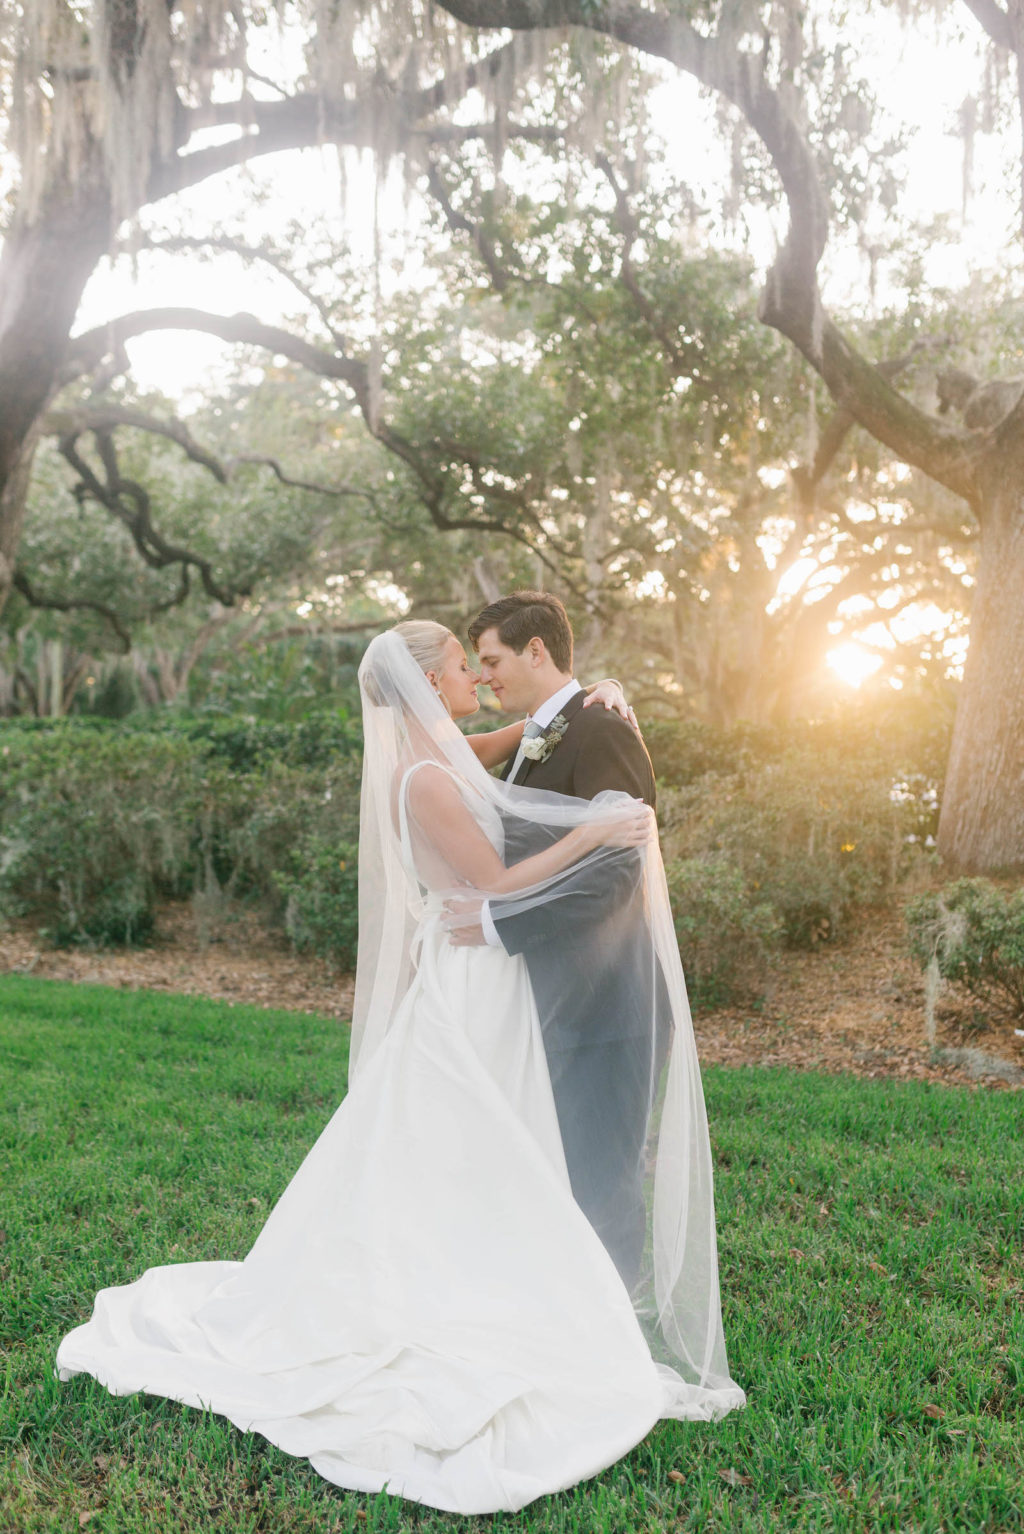 Bride and Groom Veil Shot Wedding Portrait | Bride in BHLDN Illusion Back Ballgown with Classic Updo and Natural Makeup | Tampa Bay Hair and Makeup Artist Femme Akoi Beauty Studio